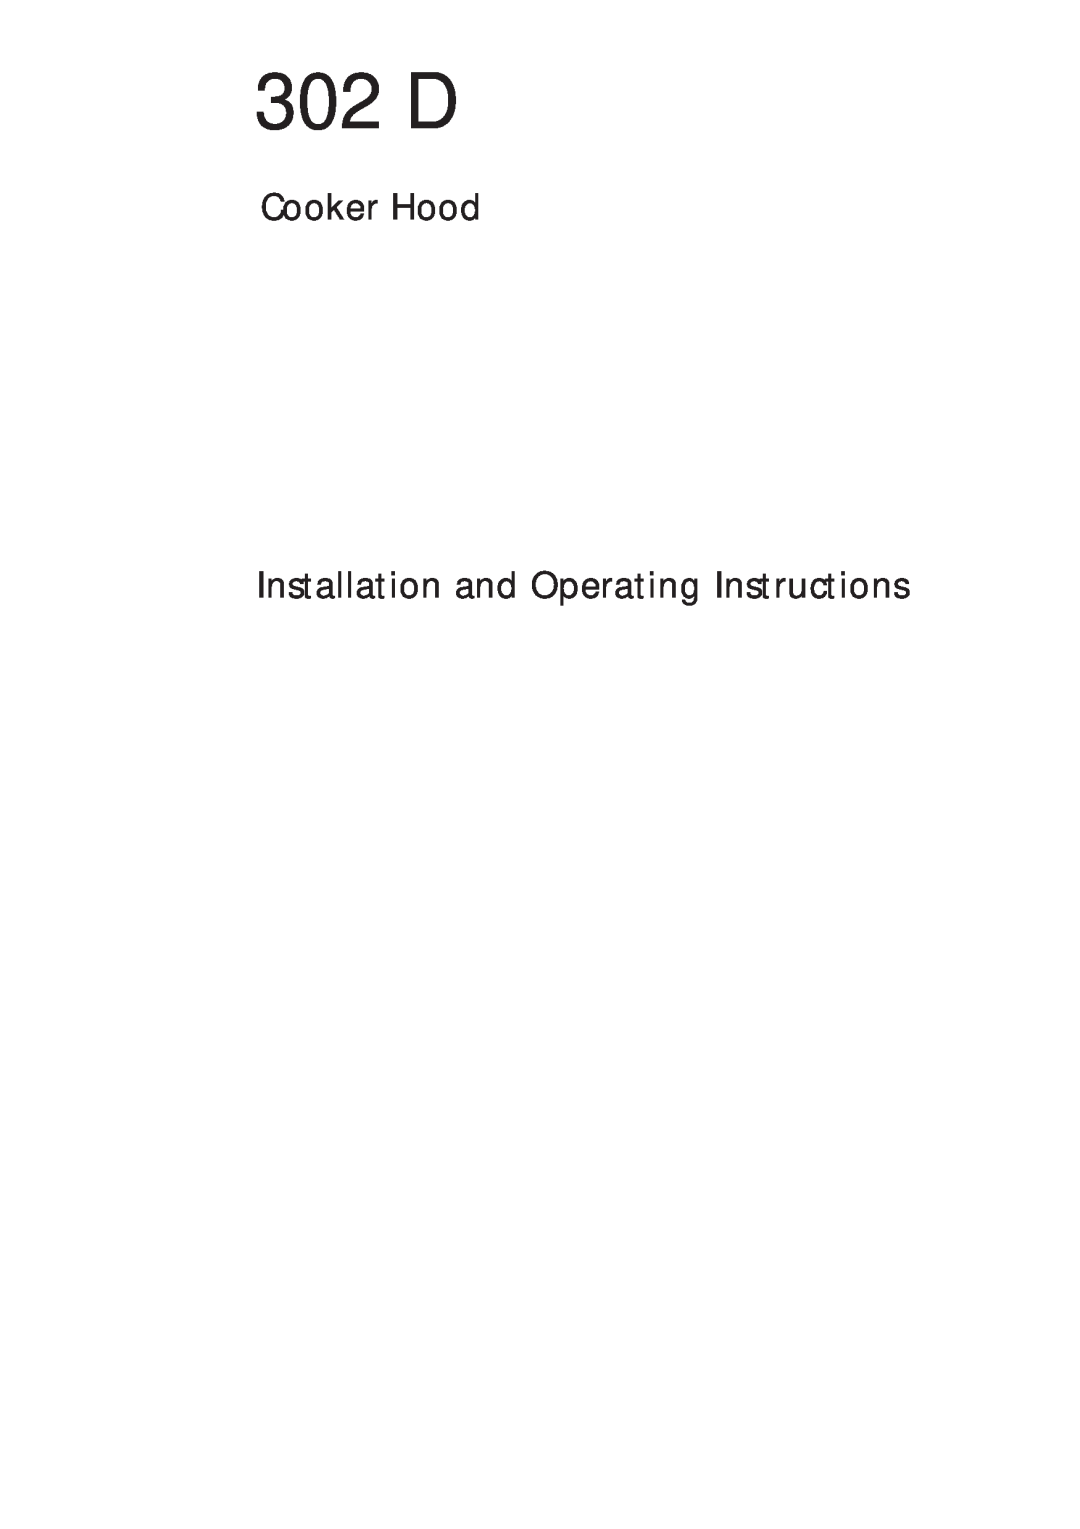 AEG 302D manual 302 D, Cooker Hood, Installation and Operating Instructions 